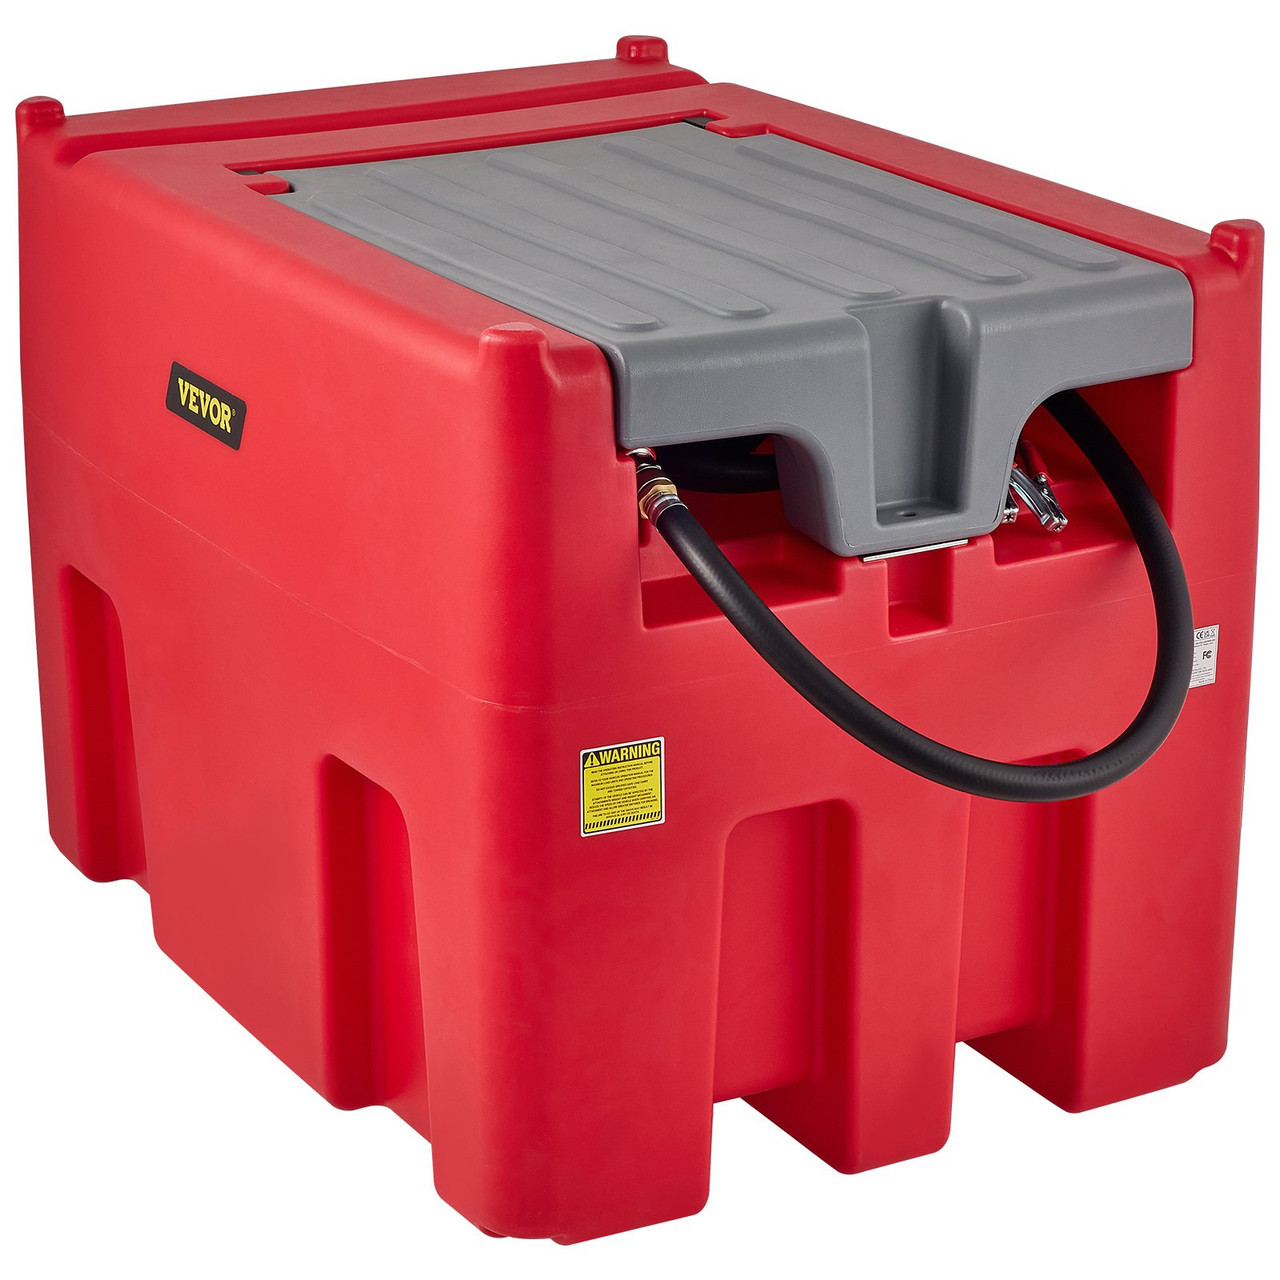 Portable Diesel Tank, 116 Gallon Capacity, Diesel Fuel Tank with 12V Electric Transfer Pump, Polyethylene Diesel Transfer Tank for Easy Fuel Transportation, Red